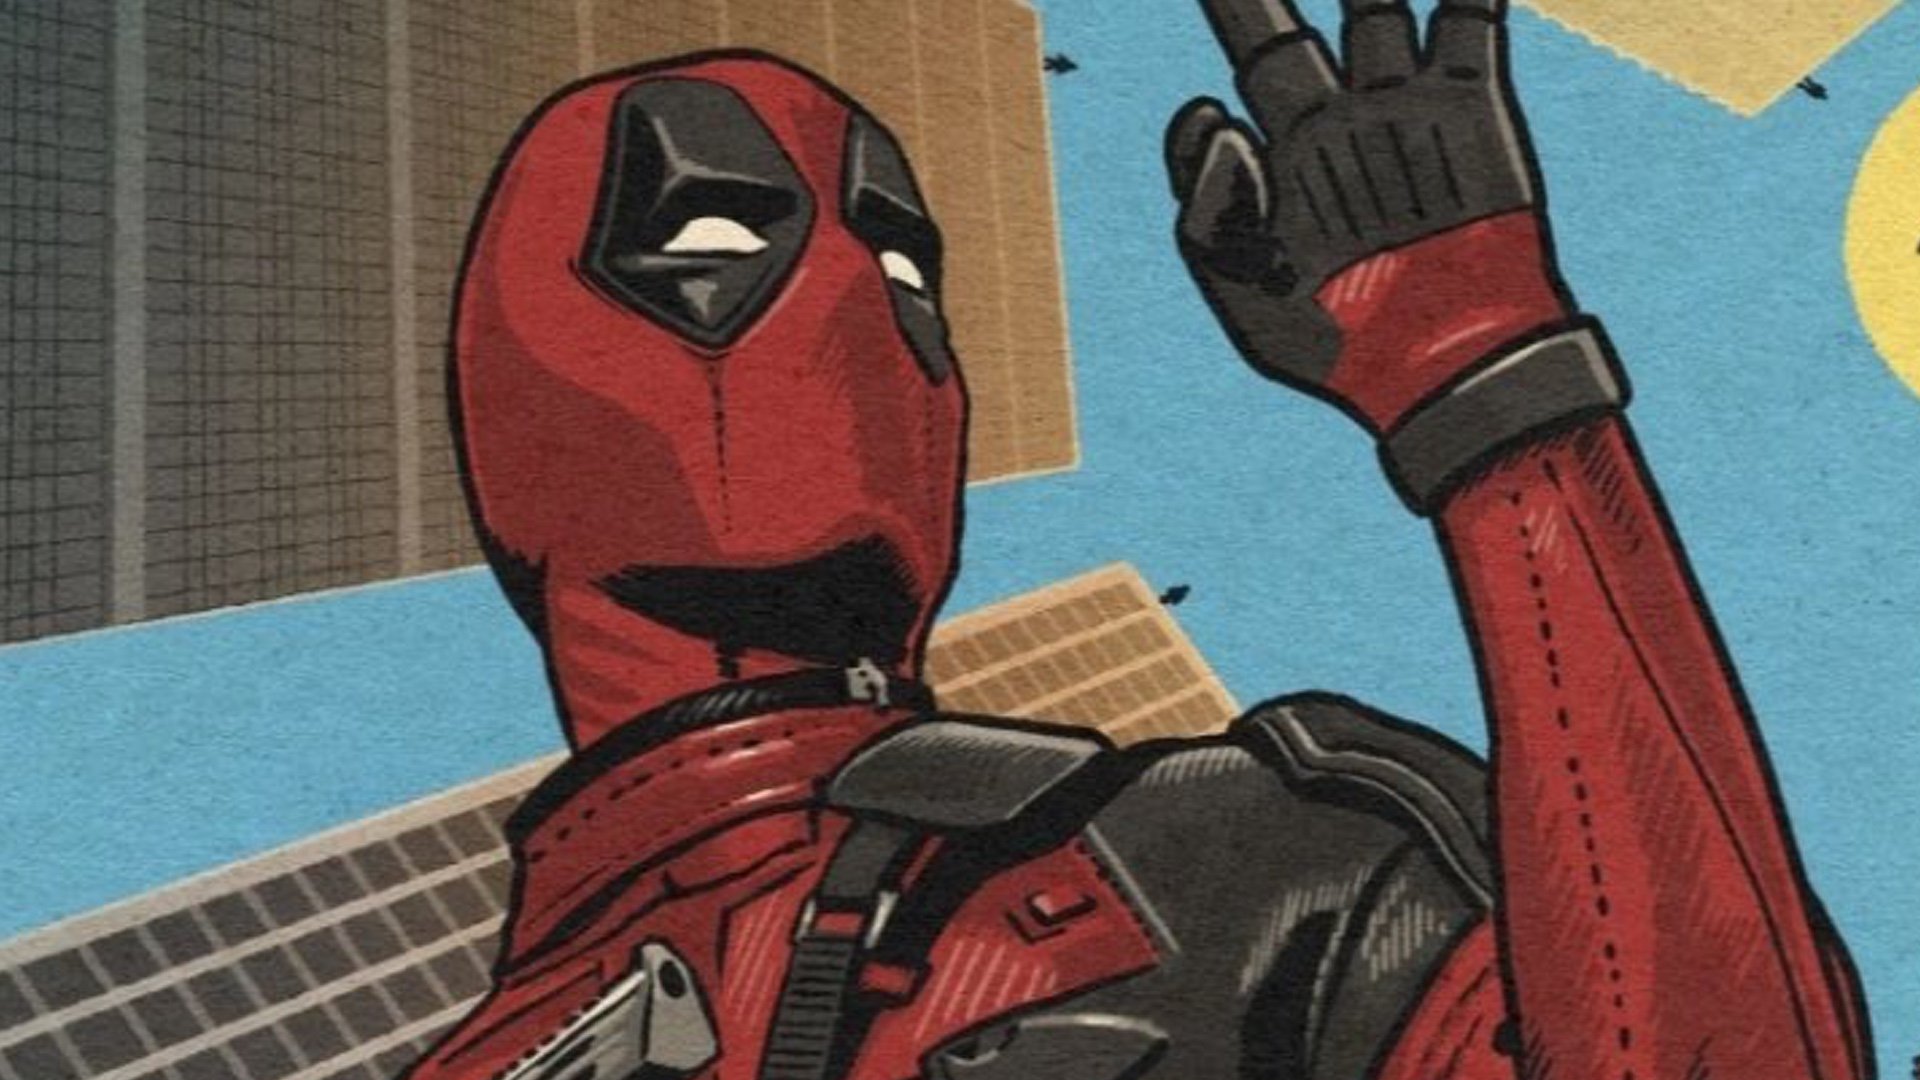 Deadpool 3': Release Date, Trailer, And More